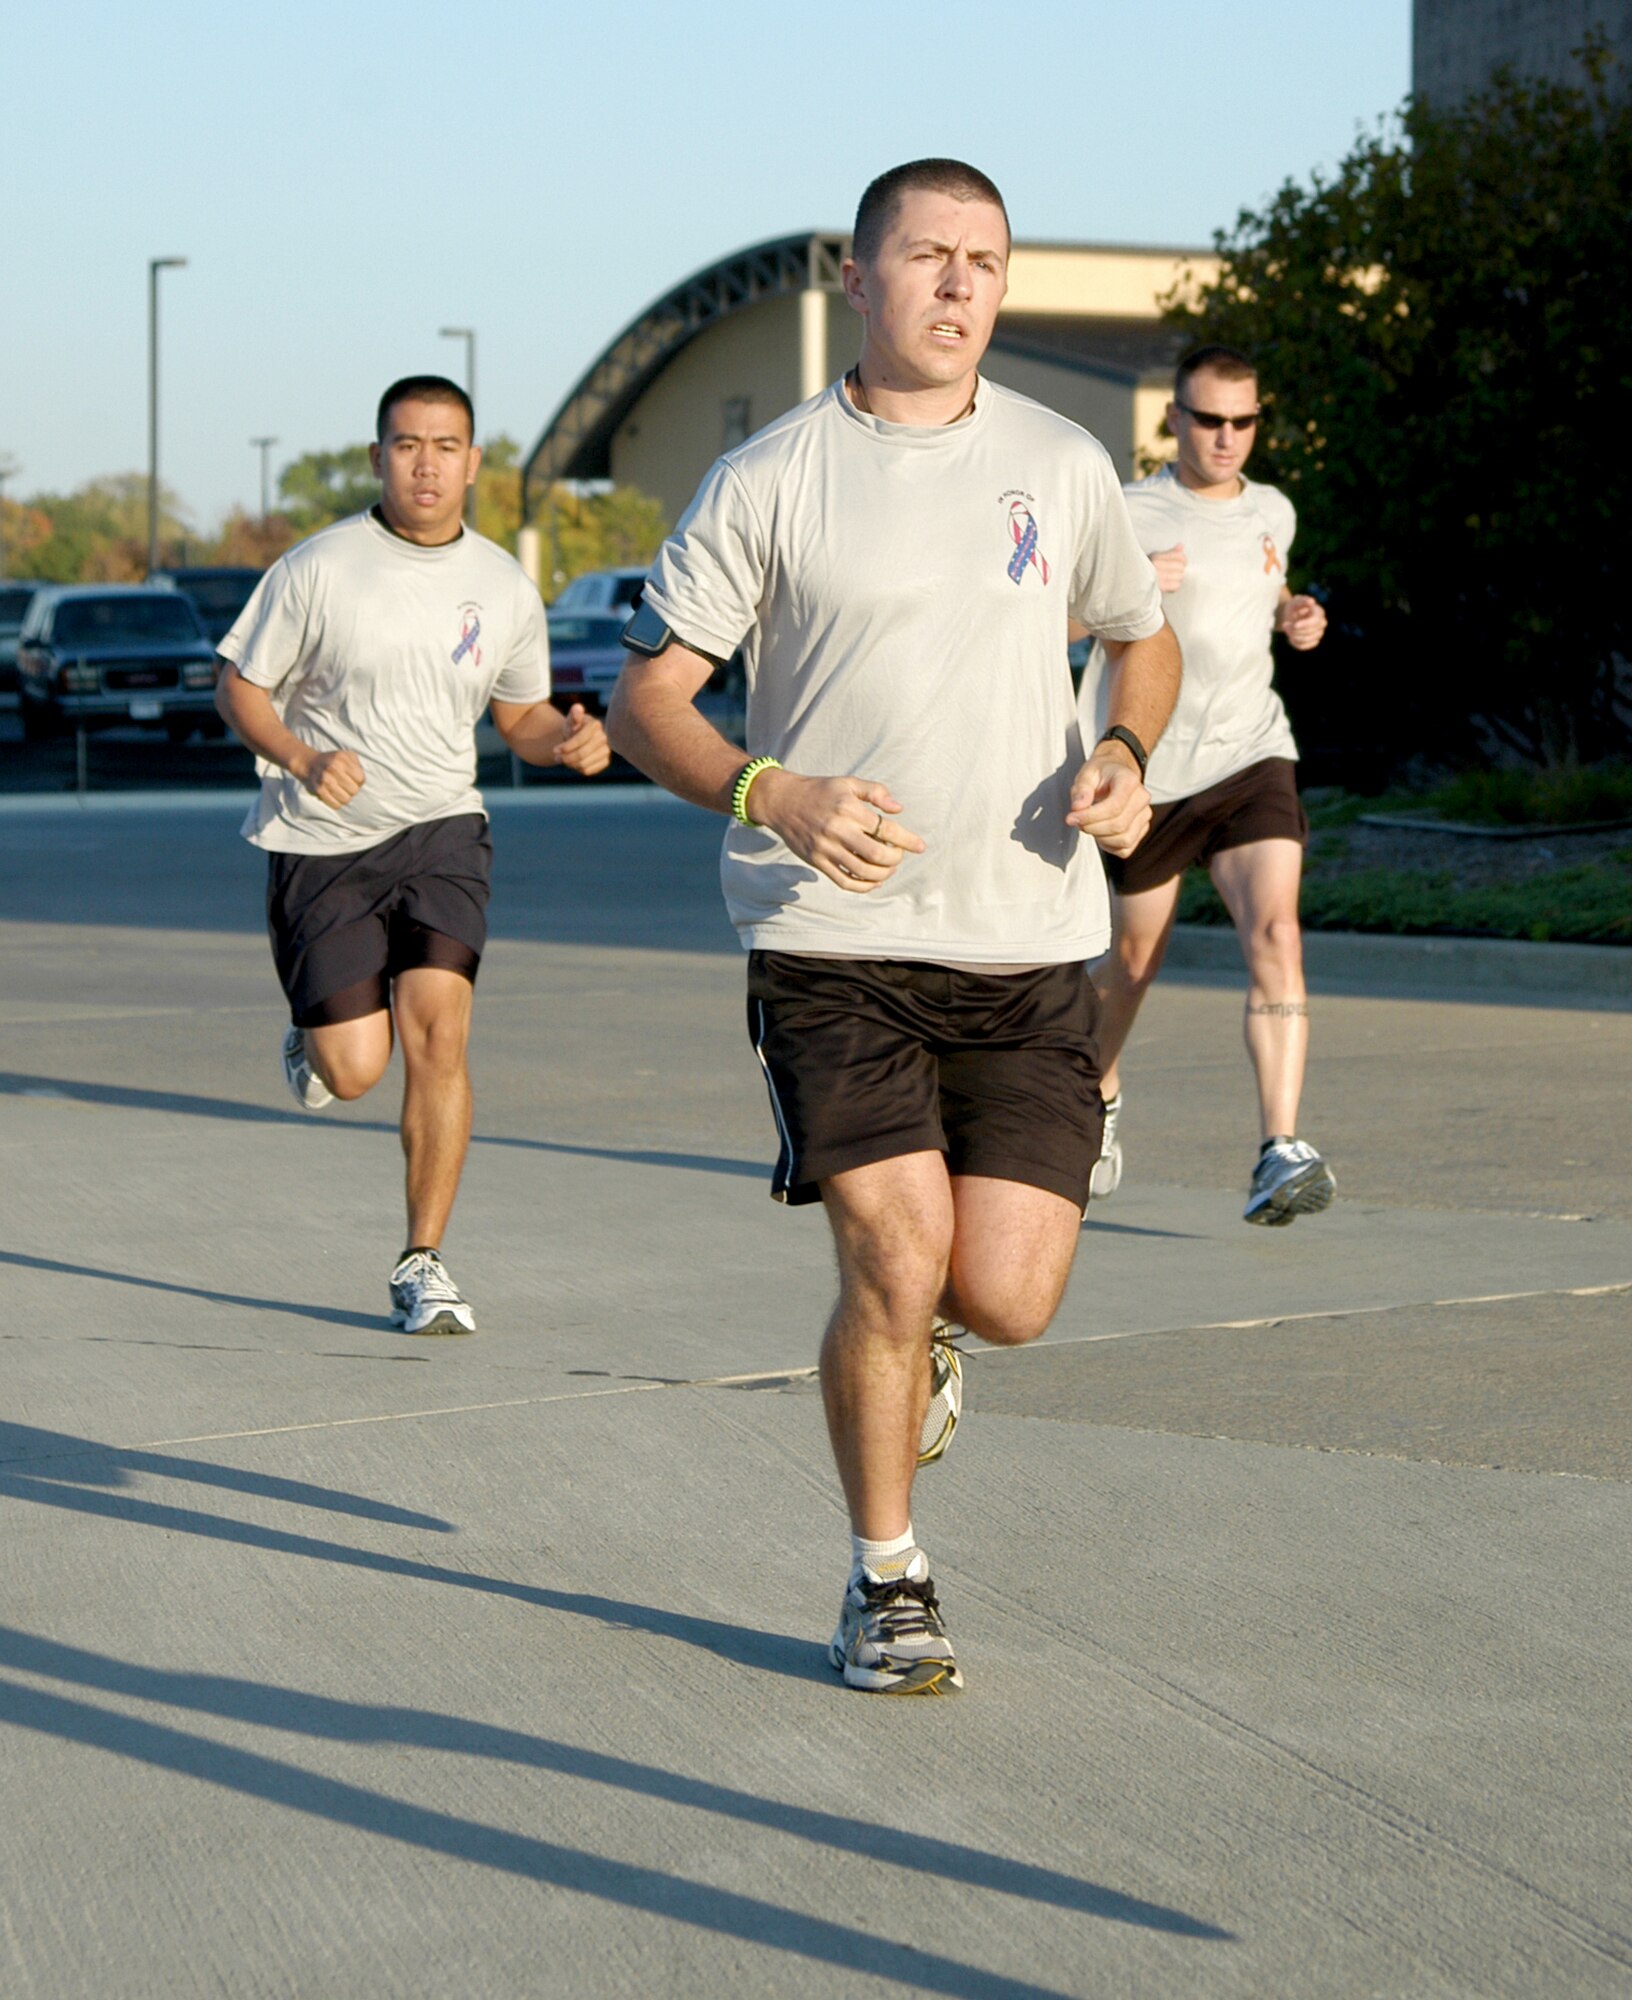 Airman 1st Class David J. Smith (front), Airman 1st Class Wilson Delos Trino (left), and Master Sgt. Johnathan M. Ward begin a 9-mile run Oct. 8, 2010, at Offutt Air Force Base, Neb. Airman Smith is a fitness specialist with the 55th Force Support Squadron. Airman Trino is a force management operations technician with the 55th FSS. Sergeant Ward is a Personnel Reliability Program monitor for the 55th Security Forces Squadron. All three are members of the 55th FSS marathon running team. (U.S. Air Force photo/Staff Sgt. James M. Hodgman)